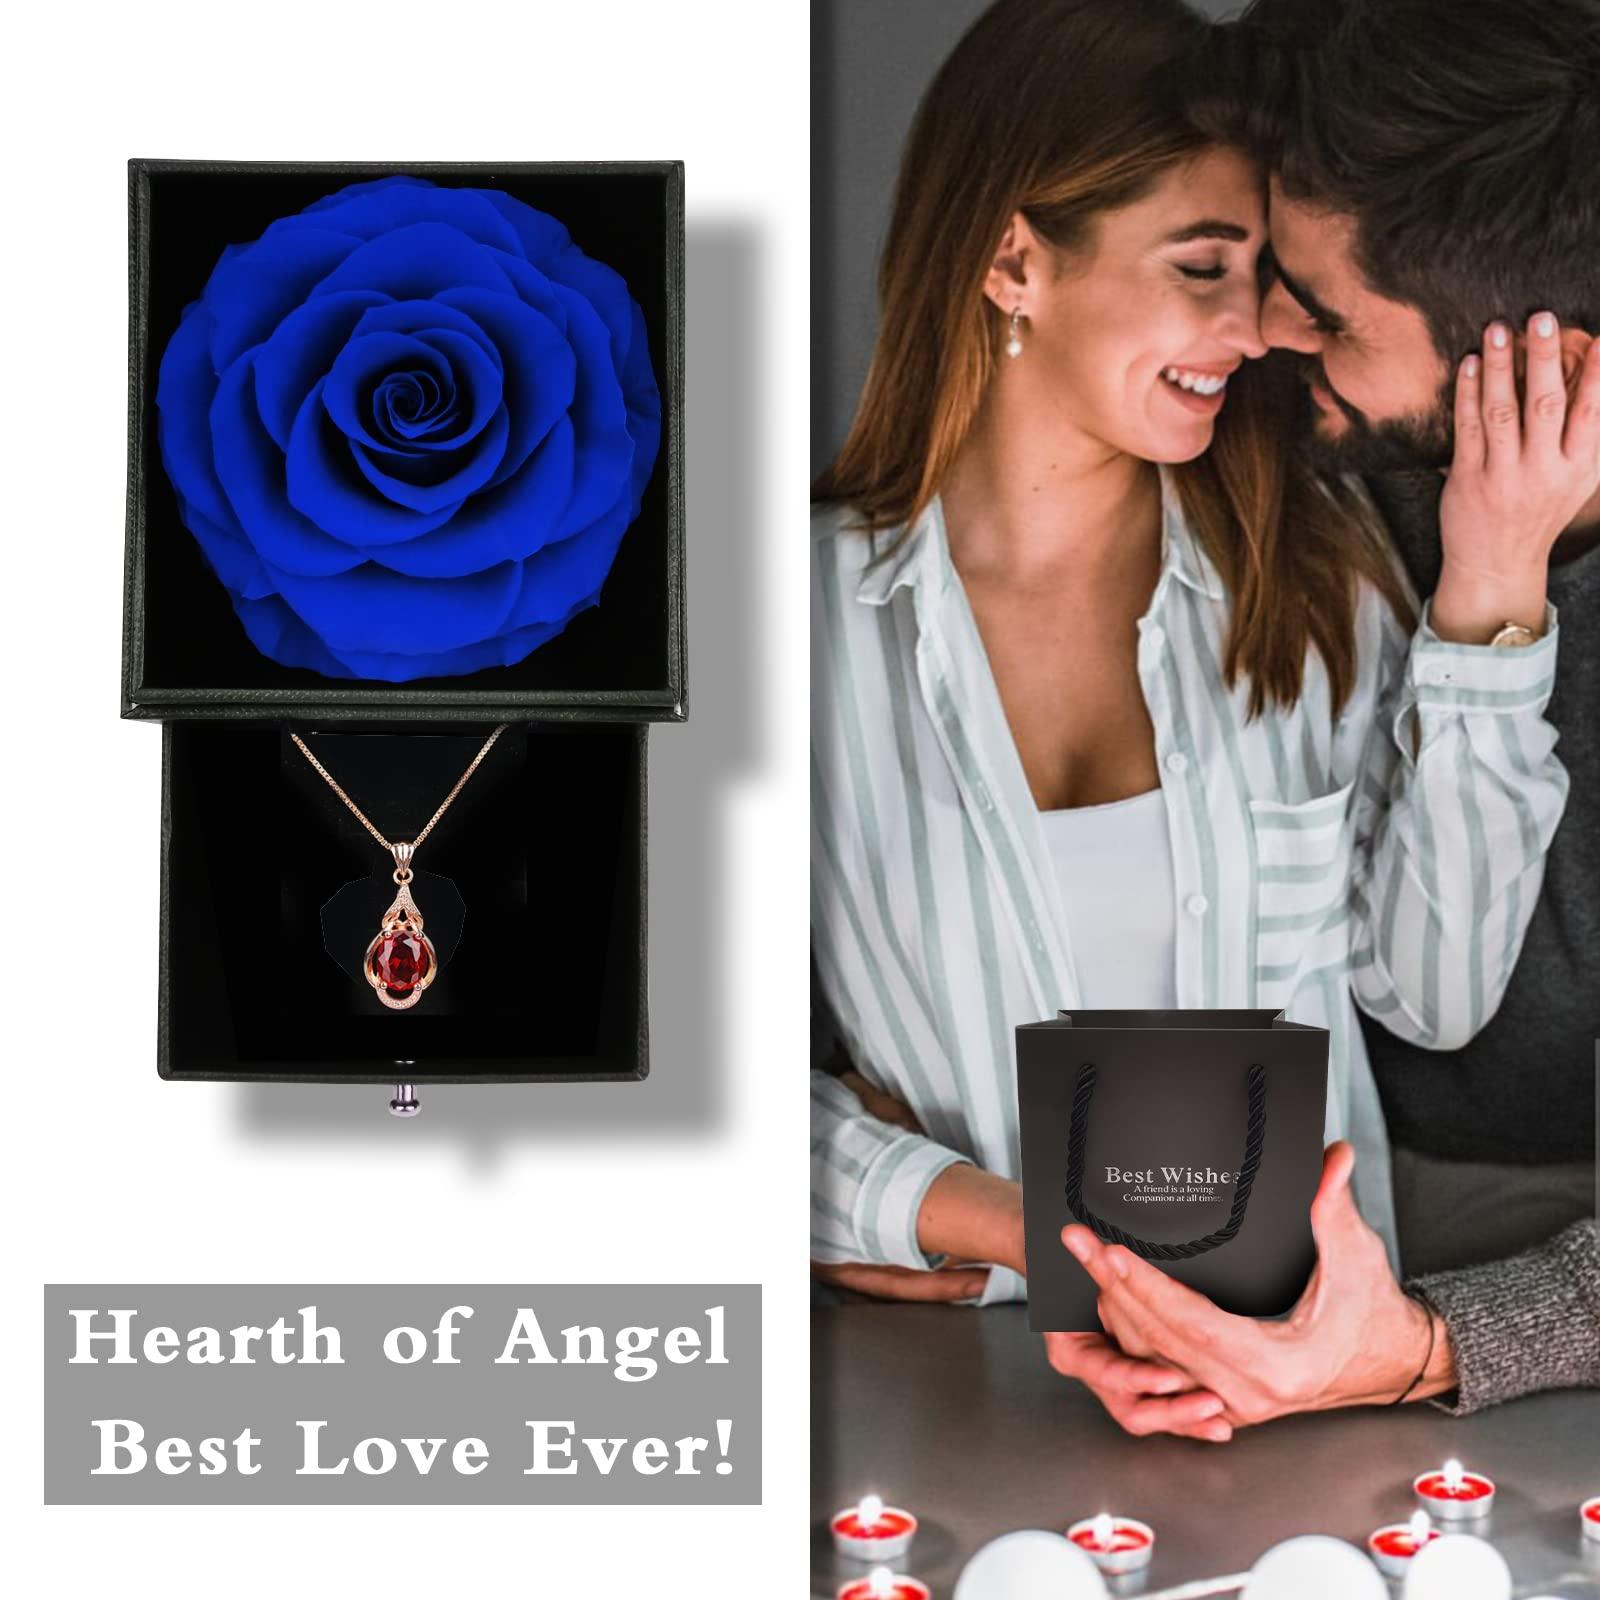 FIMAGO Preserved Real Rose with I Love You Necklace in 100 Languages Large Eternal Rose Gifts for Her for Wedding Anniversary Birthday Valentine's Day Mother's Day (YMY-DIA_S-FPK9) 4